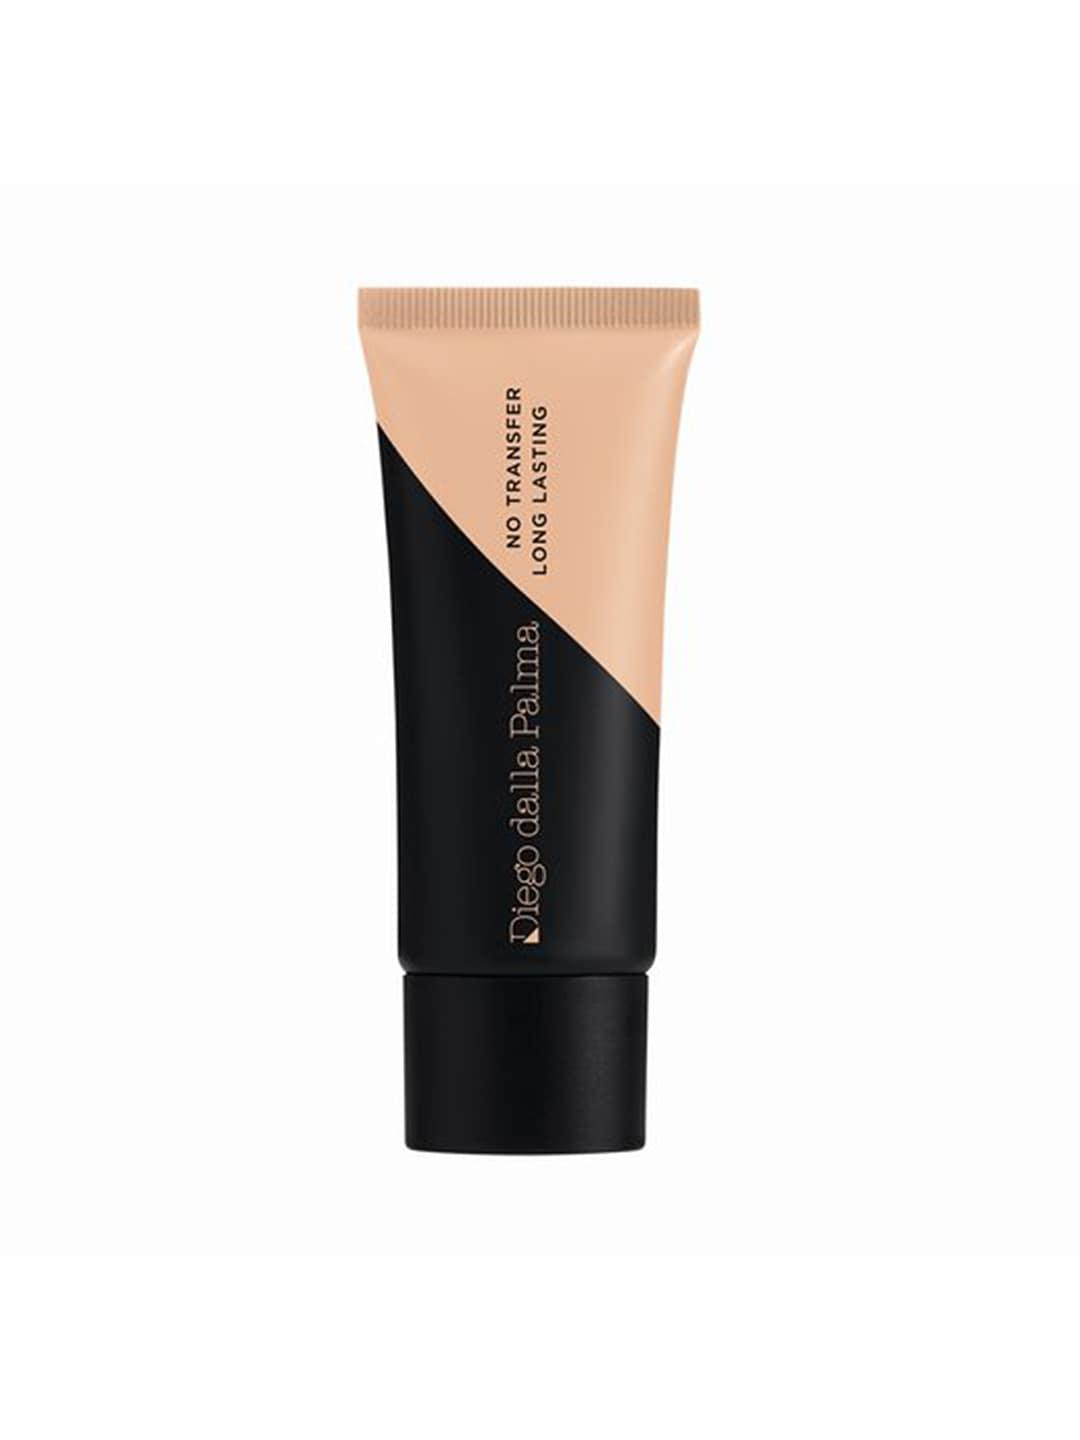 diego-dalla-palma-milano-stay-on-me-no-transfer-water-resistant-foundation-30ml---biscuit